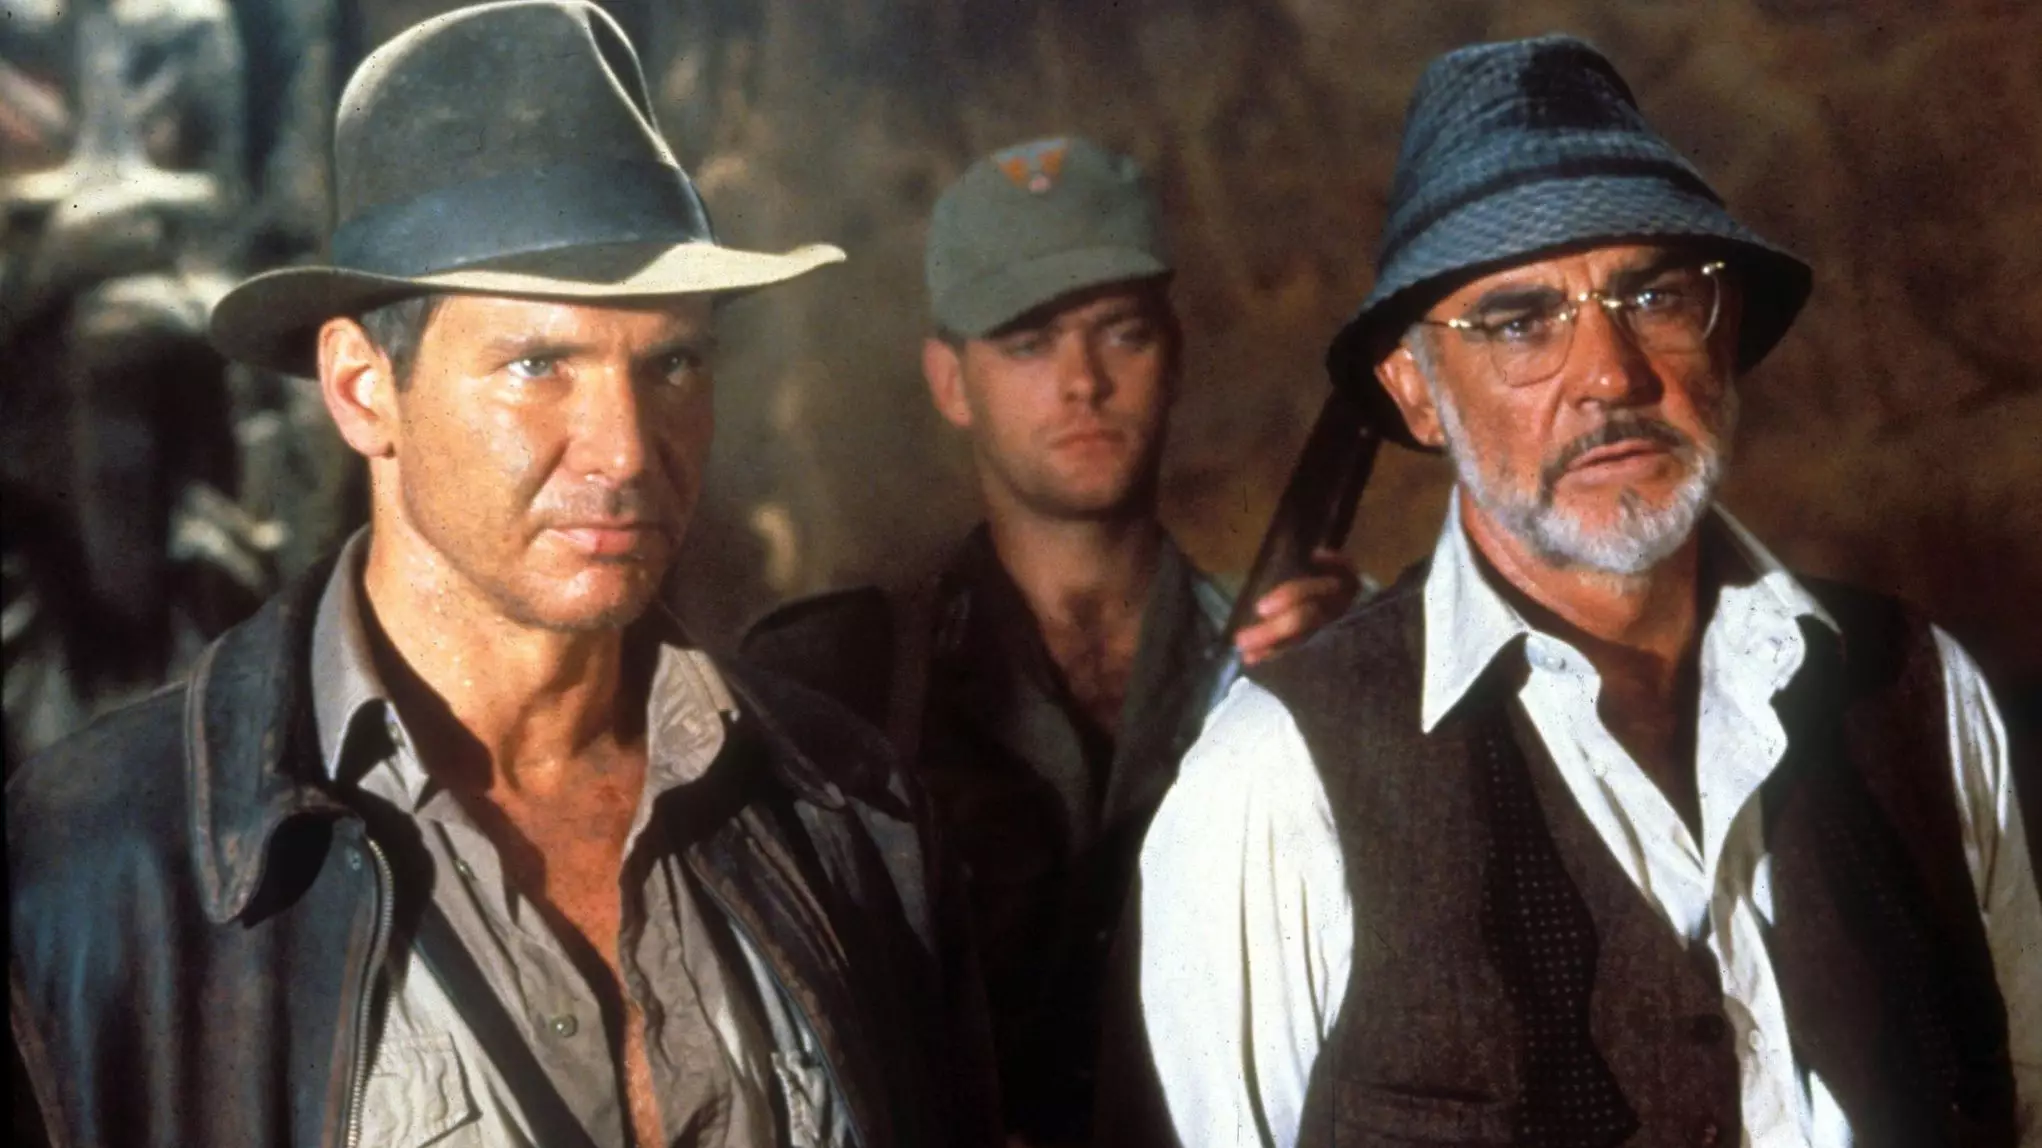 Harrison Ford Pays Tribute To On-Screen Father Sean Connery